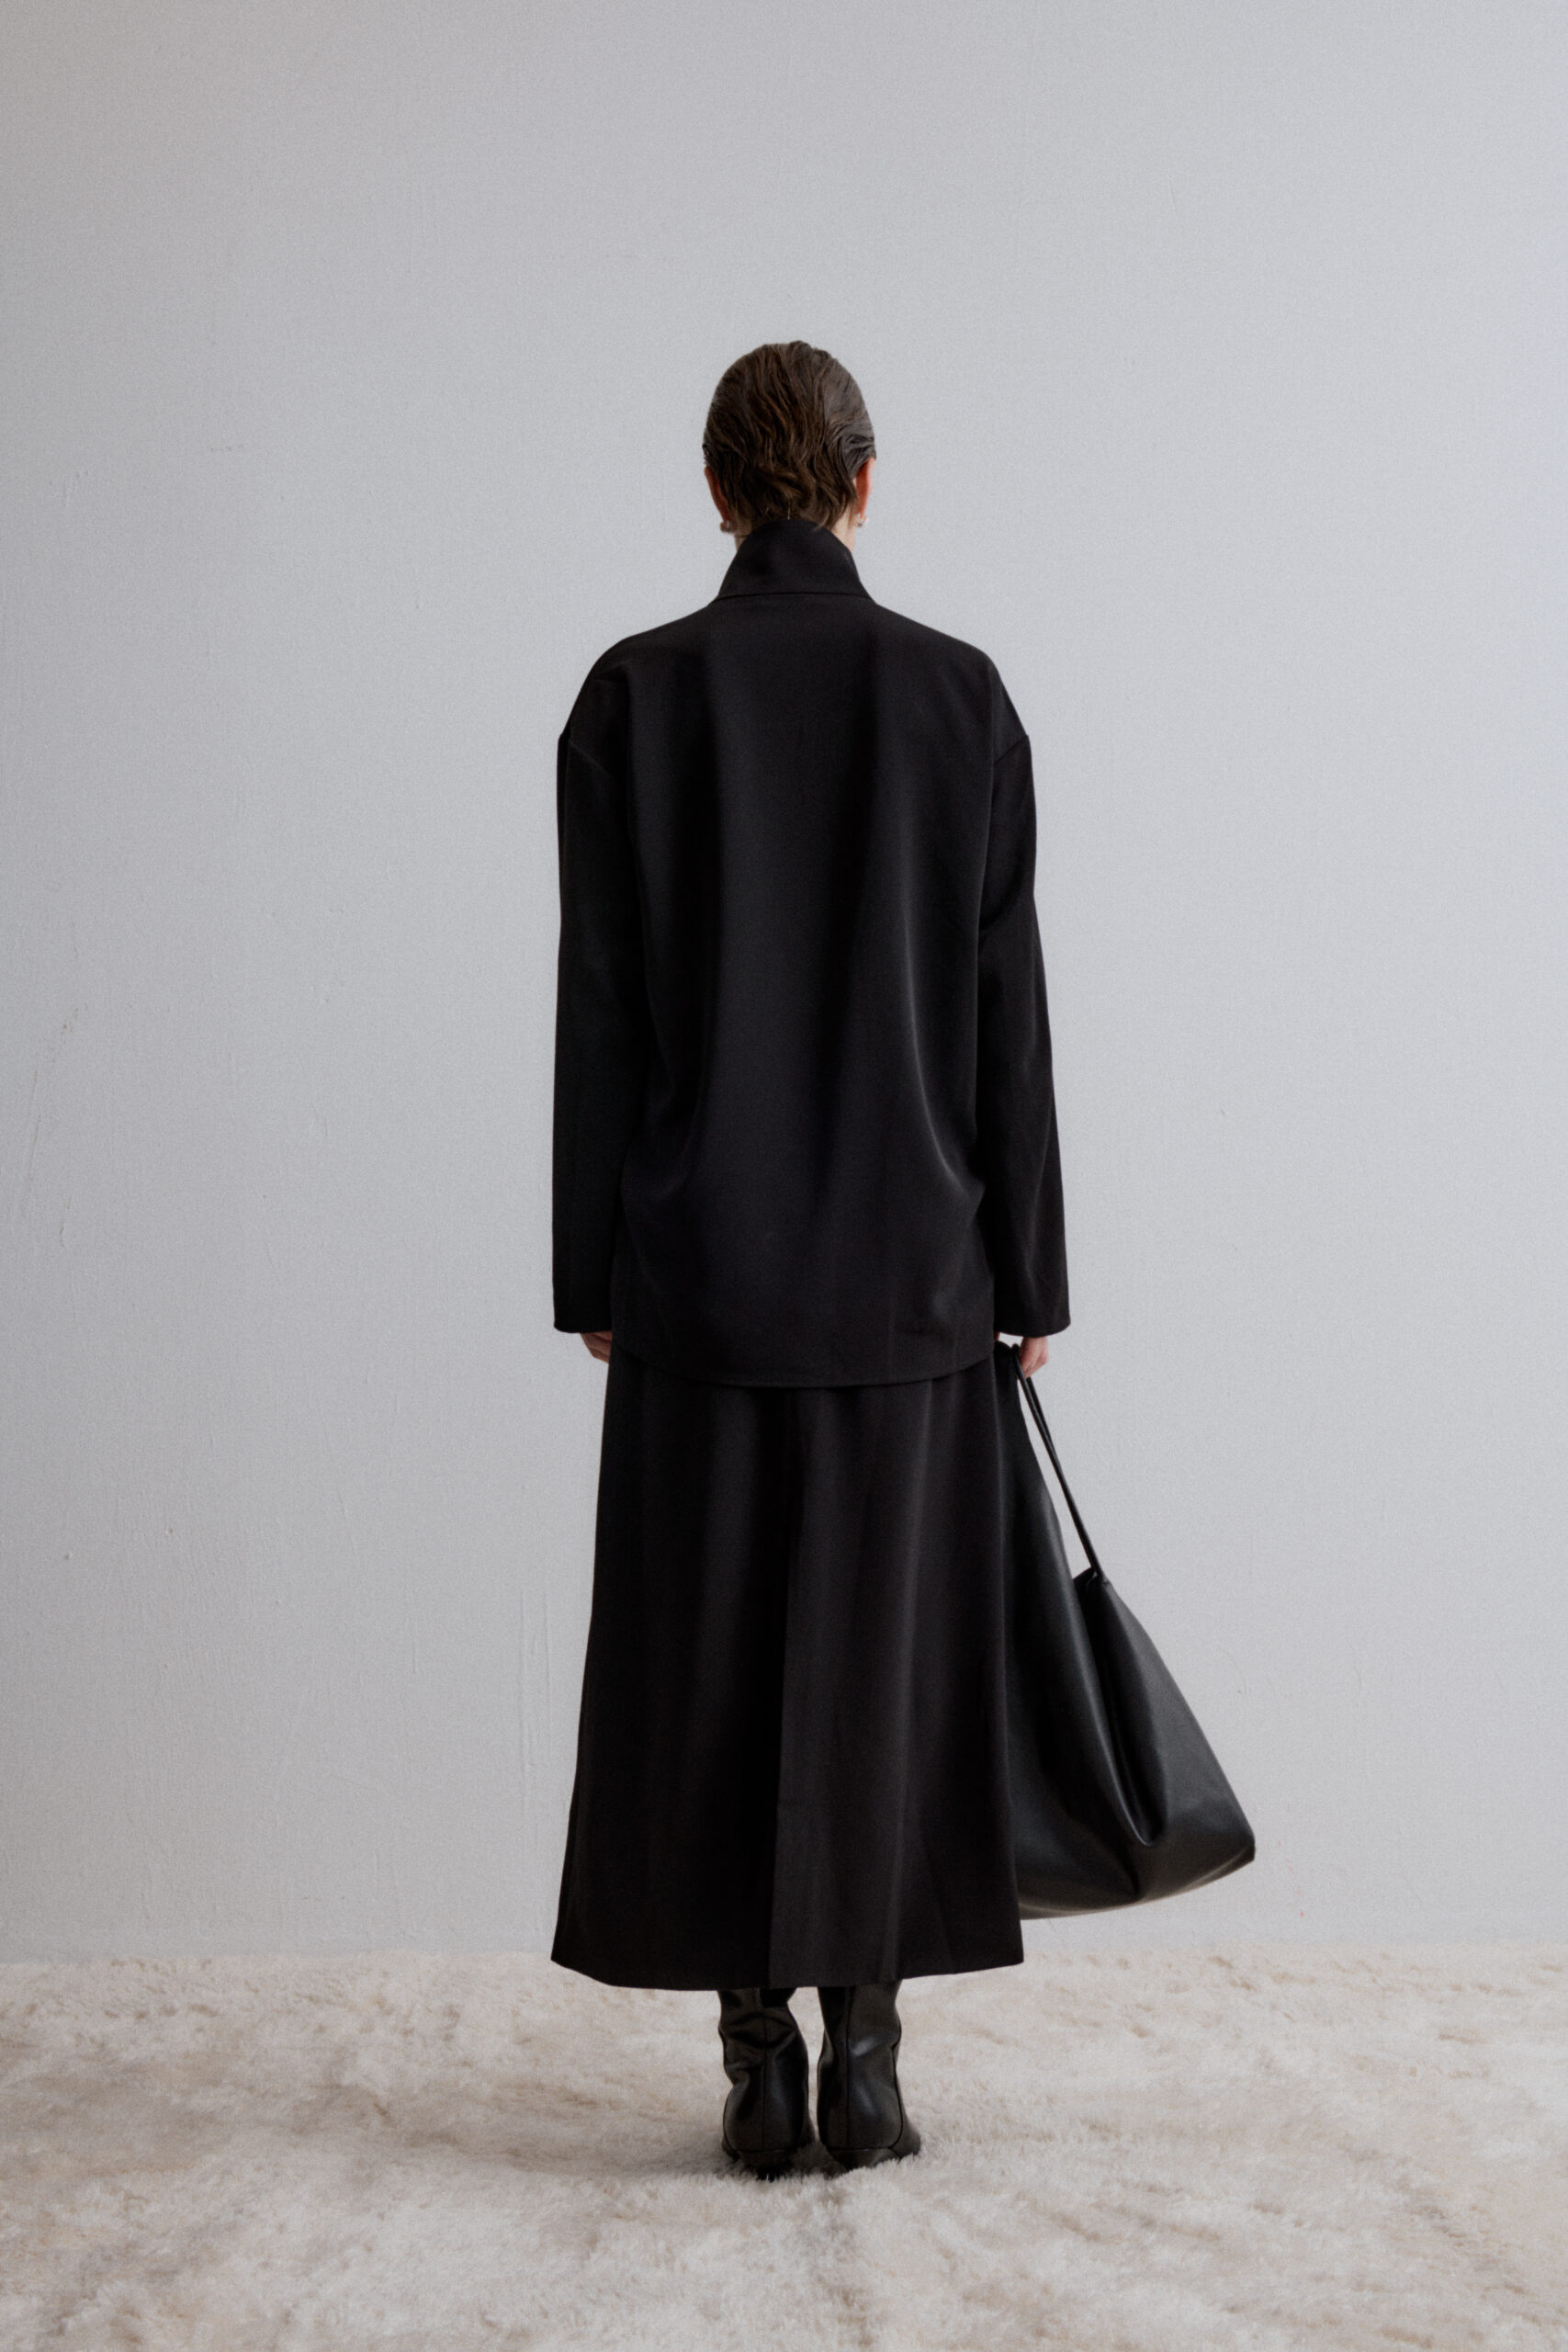 Long black skirt with front and back slits